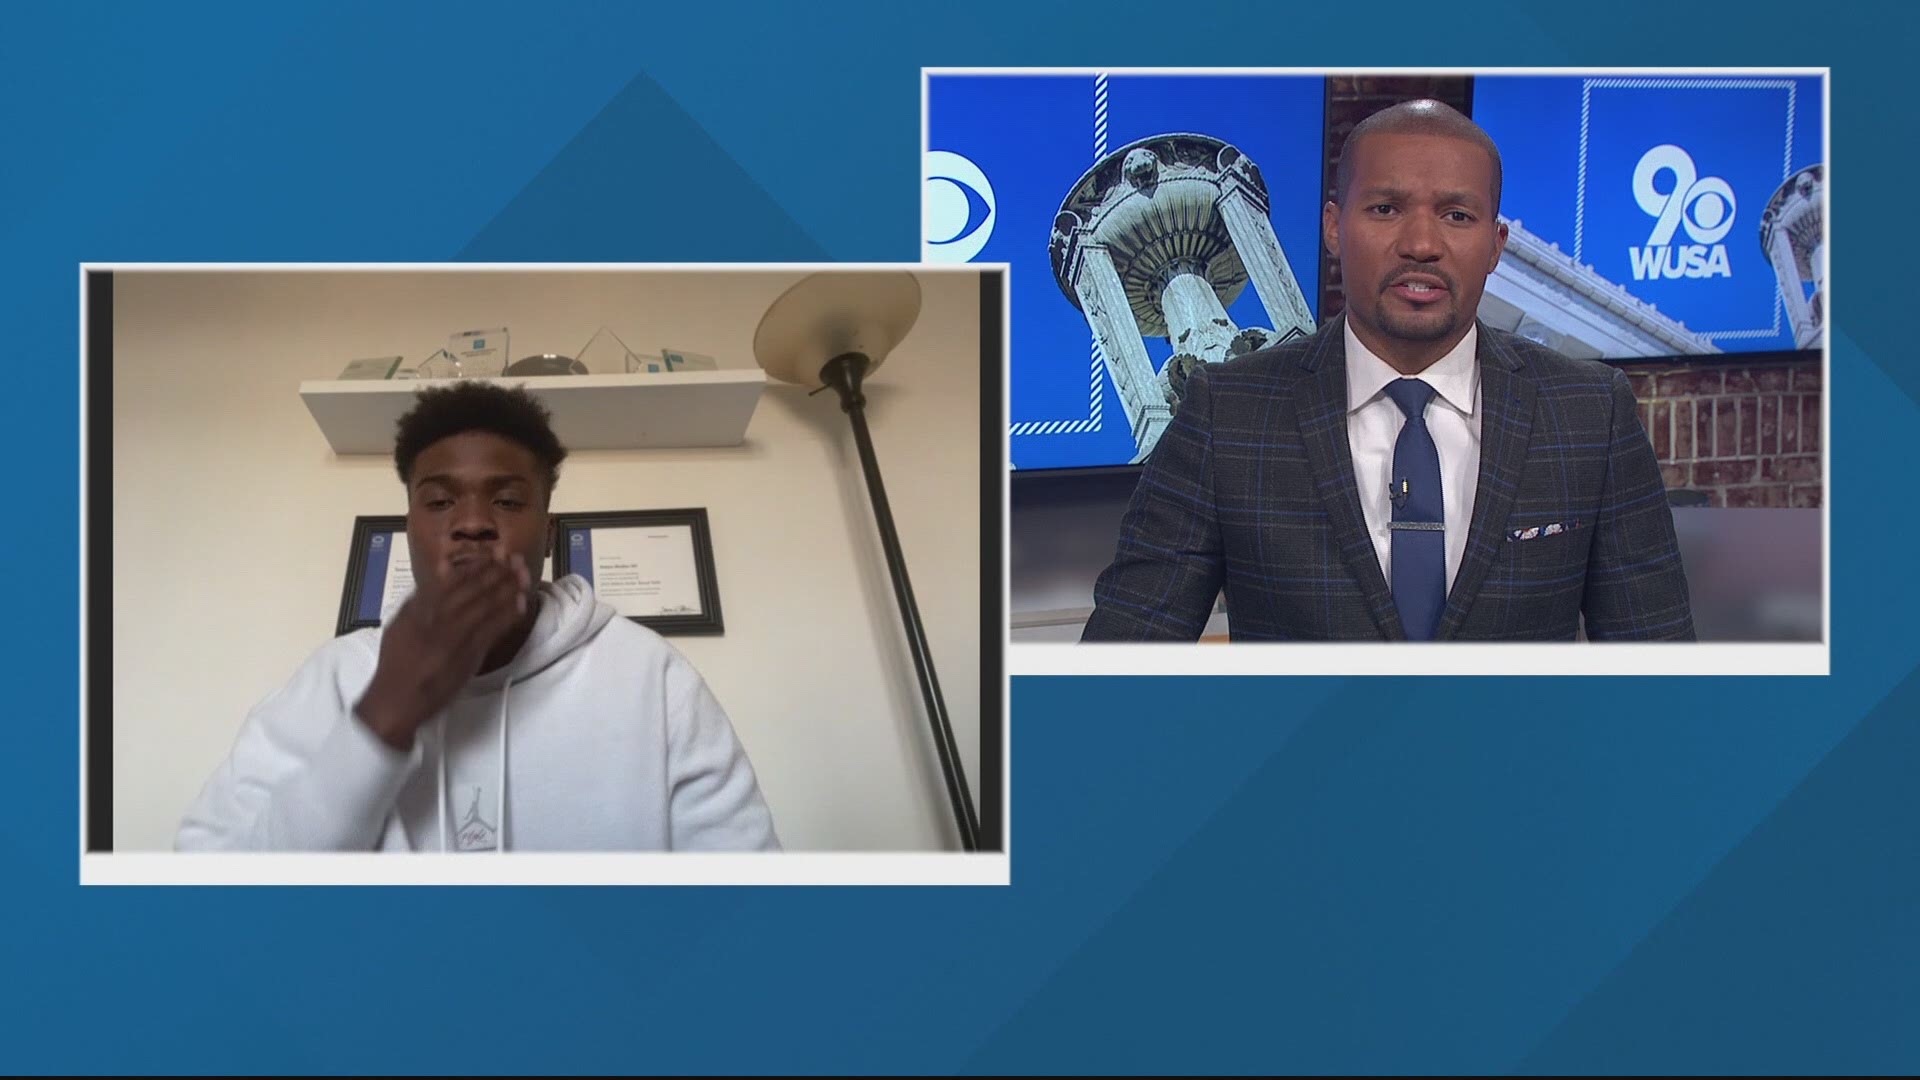 Dwayne Haskins has parted ways with the Washington Football Team. Here's the QB's exclusive interview with WUSA9 just hours after the announcement.